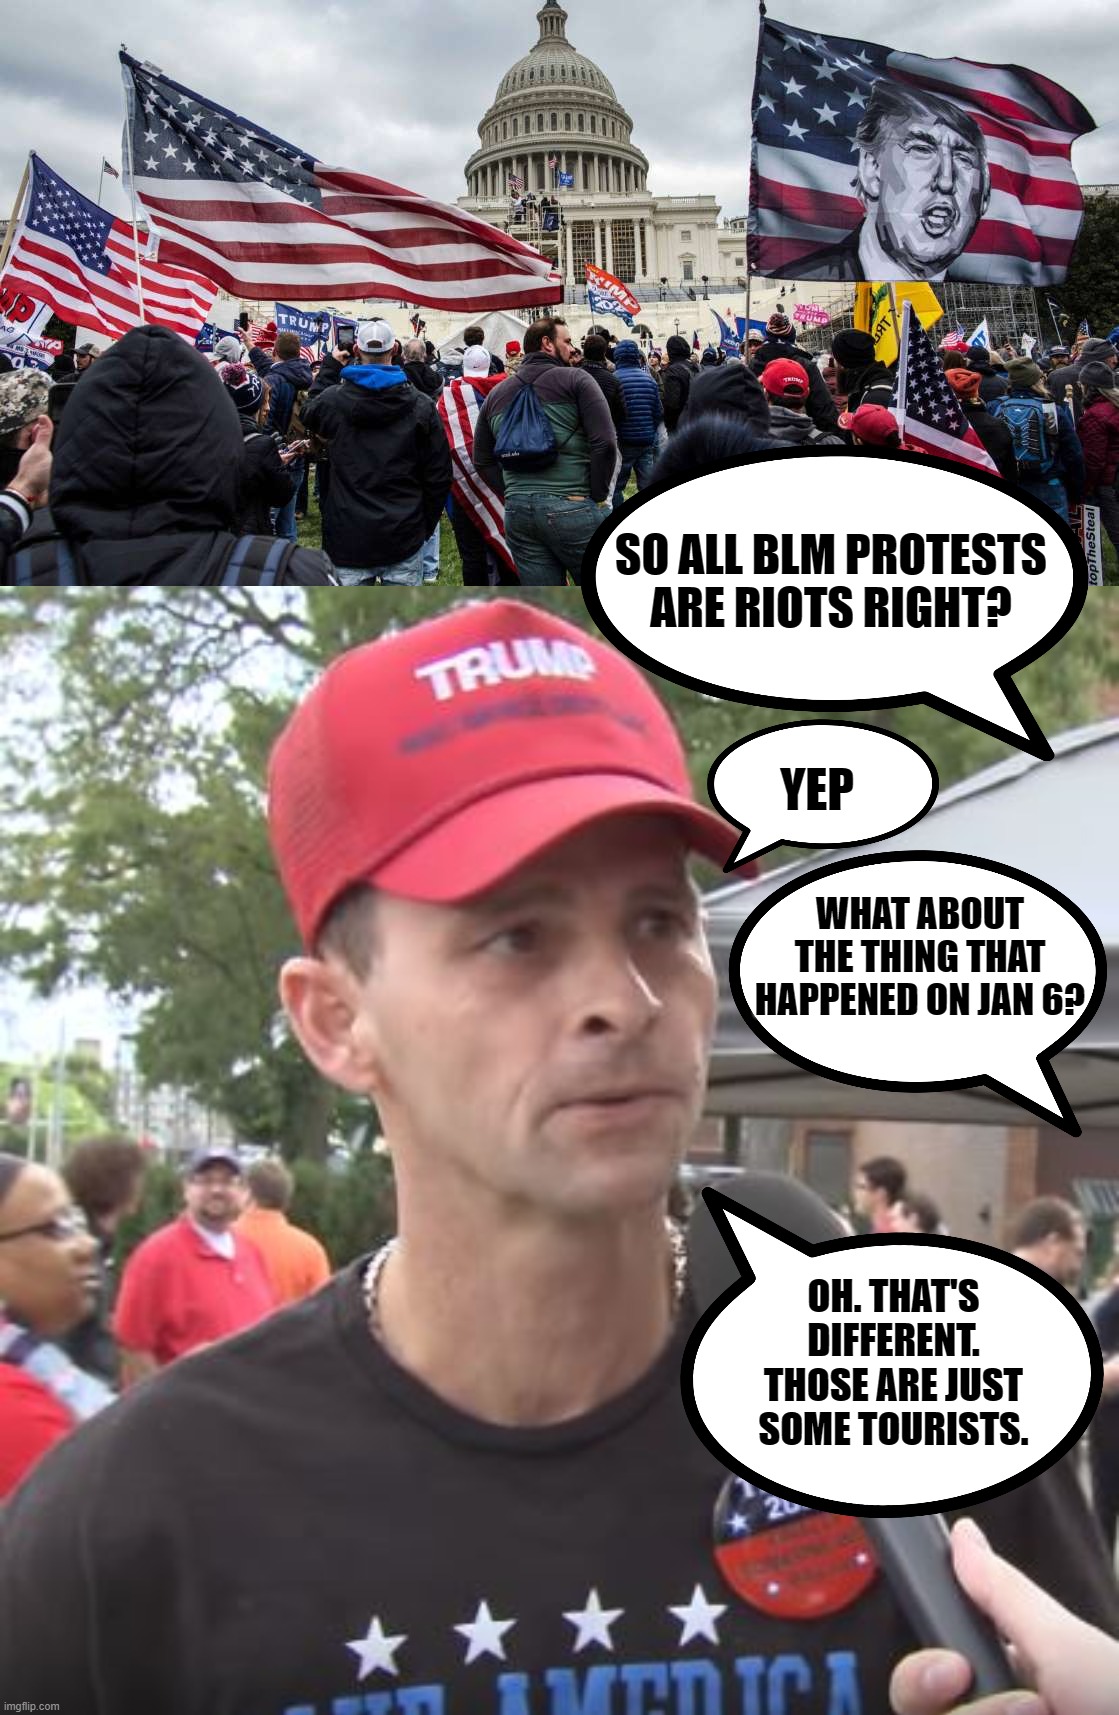 They're just trying to find the gift shop | SO ALL BLM PROTESTS ARE RIOTS RIGHT? YEP; WHAT ABOUT THE THING THAT HAPPENED ON JAN 6? OH. THAT'S DIFFERENT. THOSE ARE JUST SOME TOURISTS. | image tagged in memes,capitol hill riot,trump supporter,tourists | made w/ Imgflip meme maker